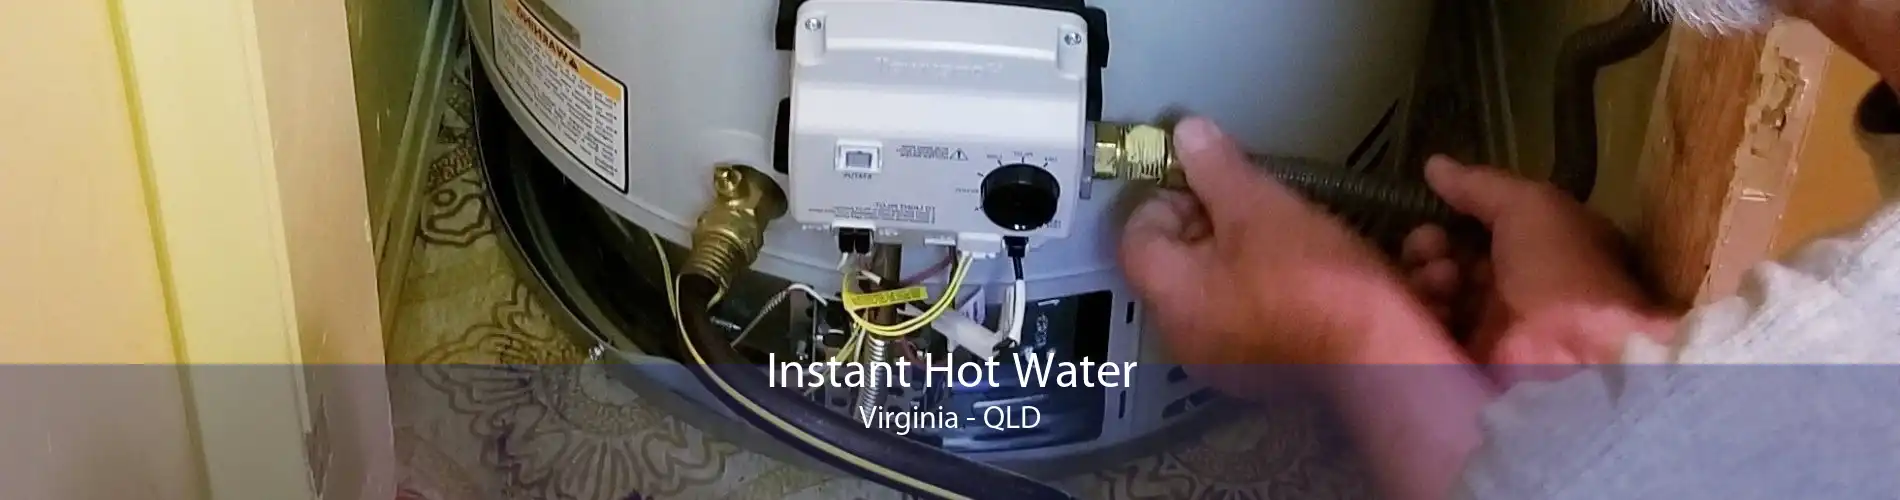 Instant Hot Water Virginia - QLD